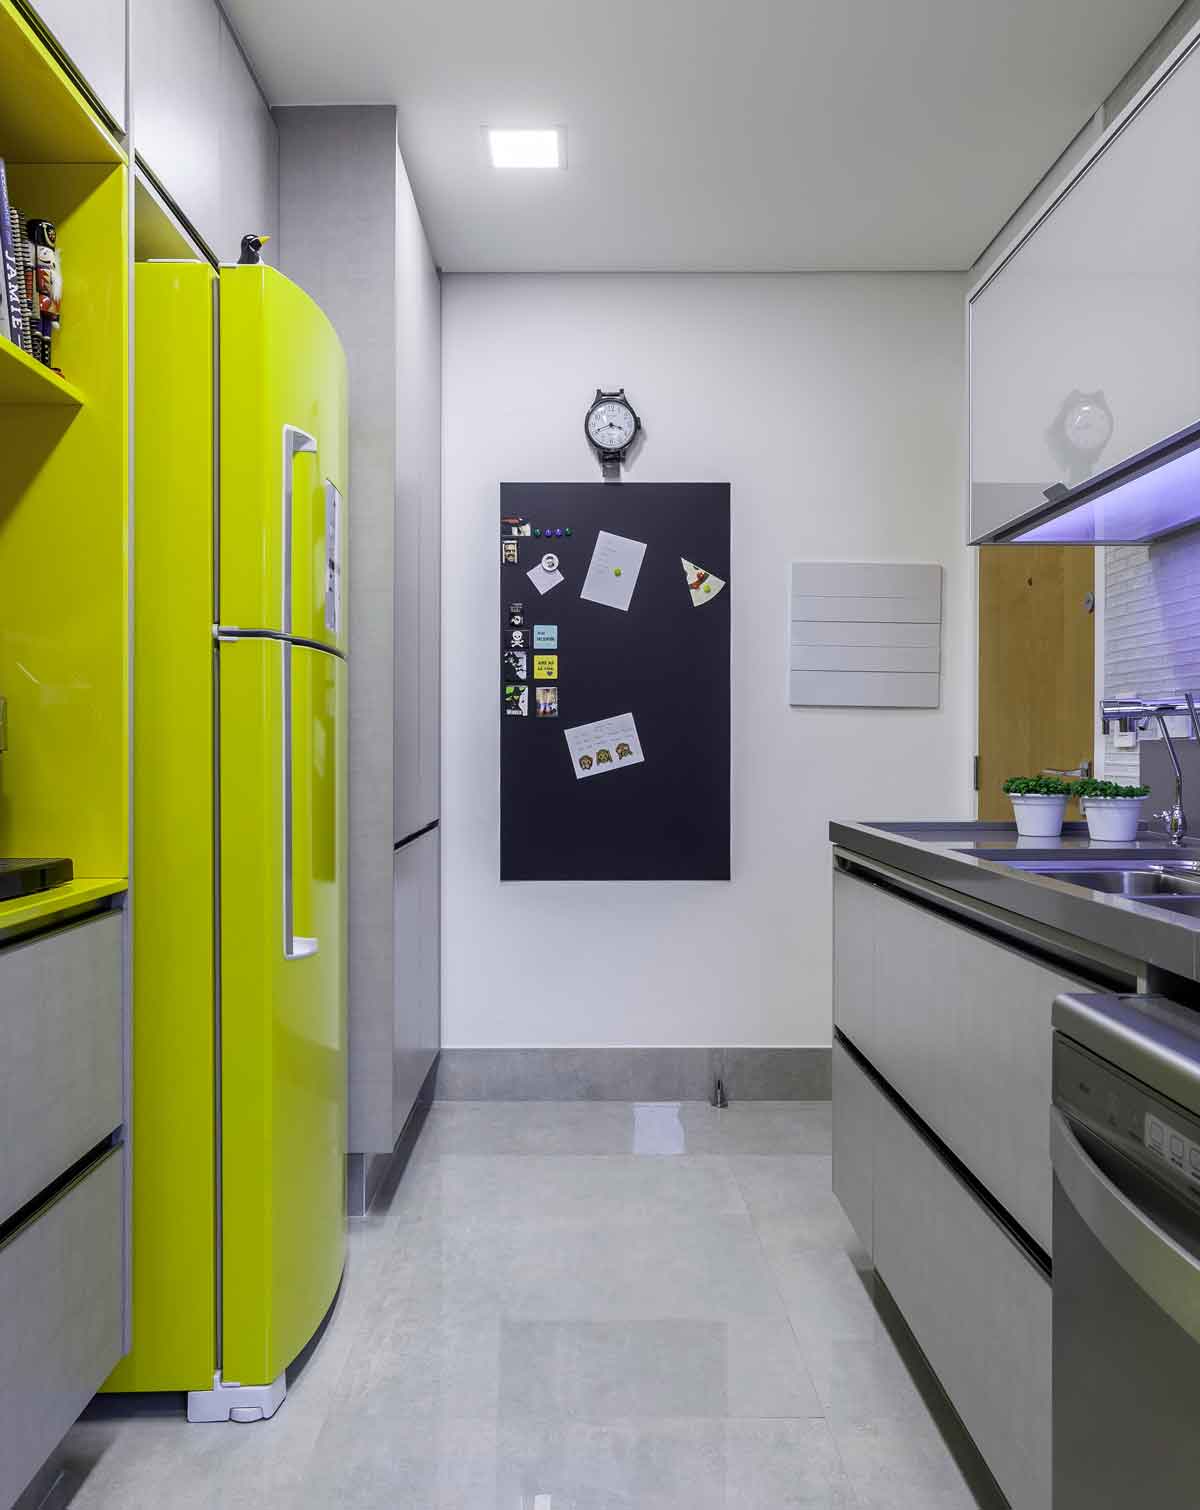 In this kitchen, architect Cristiane Schiavoni solved a dissatisfaction of the resident, who bought the wrong model of refrigerator. To overcome the situation, she suggested wrapping it in the same yellow tone already part of the cabinetry. “Enthusiastically, the client loved it,” she recalls | Photo: Carlos Piratininga